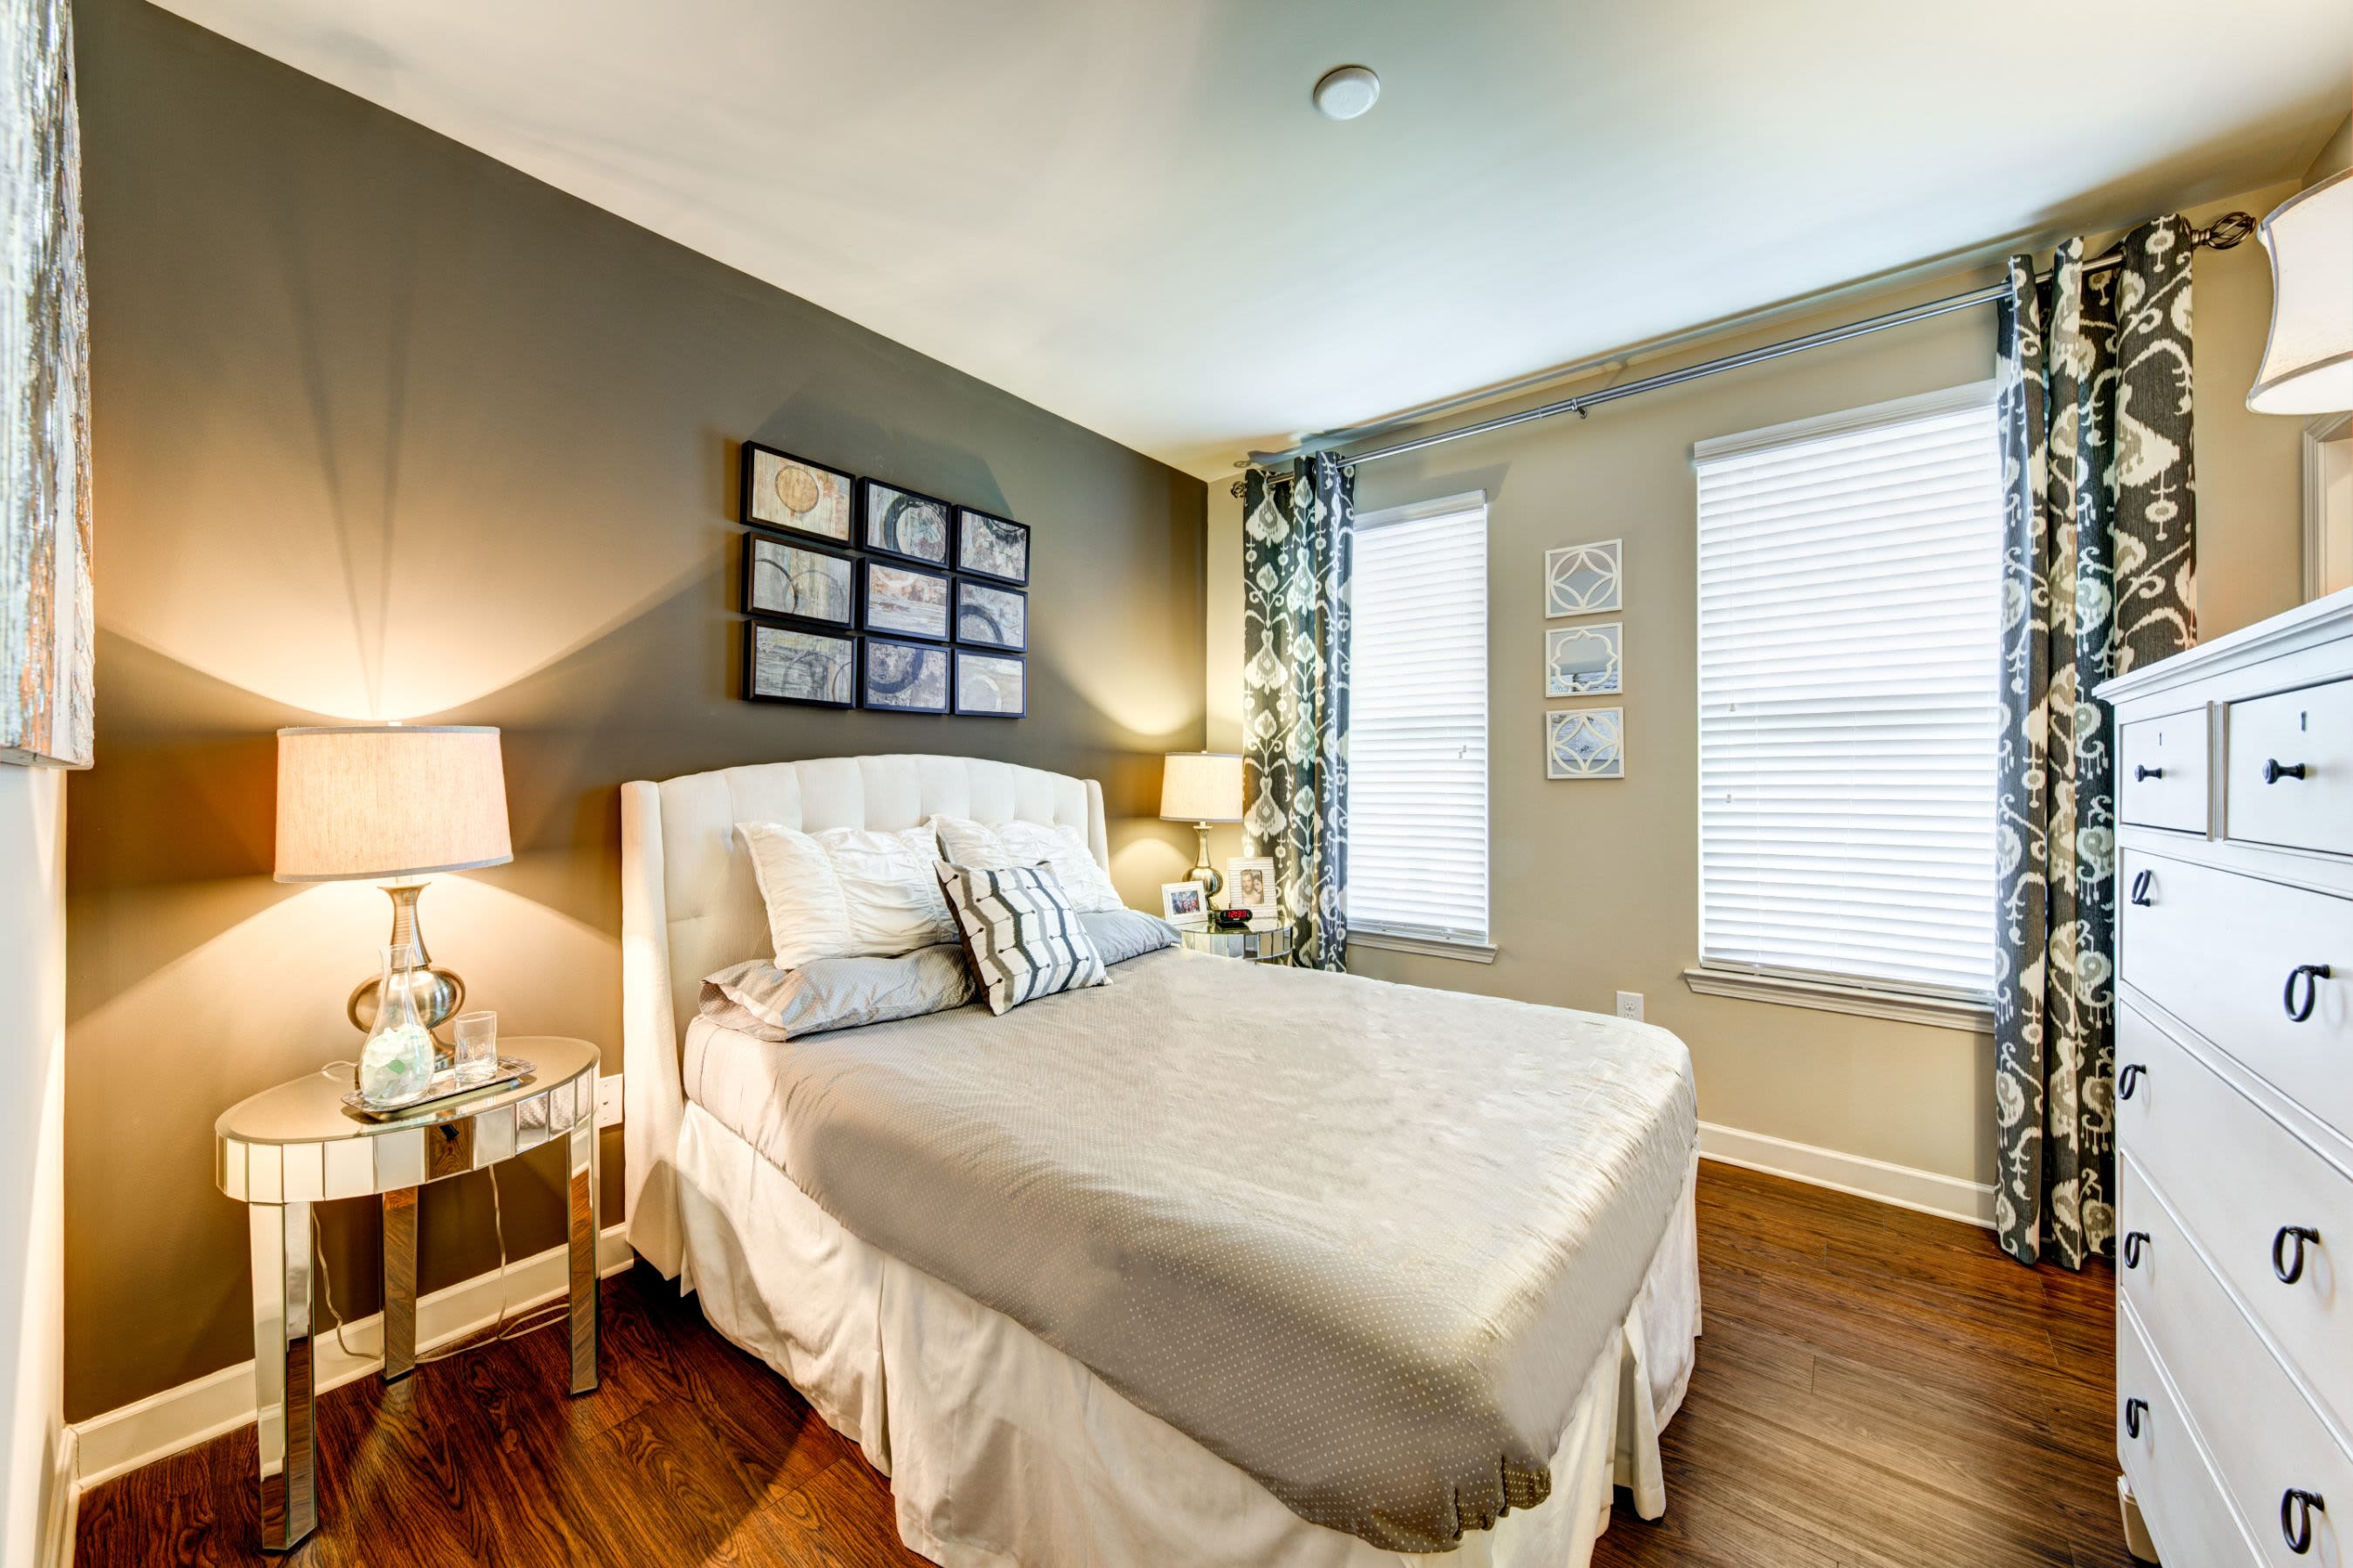 Bedroom with wood style flooring at Marquis at Morrison Plantation in Mooresville, North Carolina 